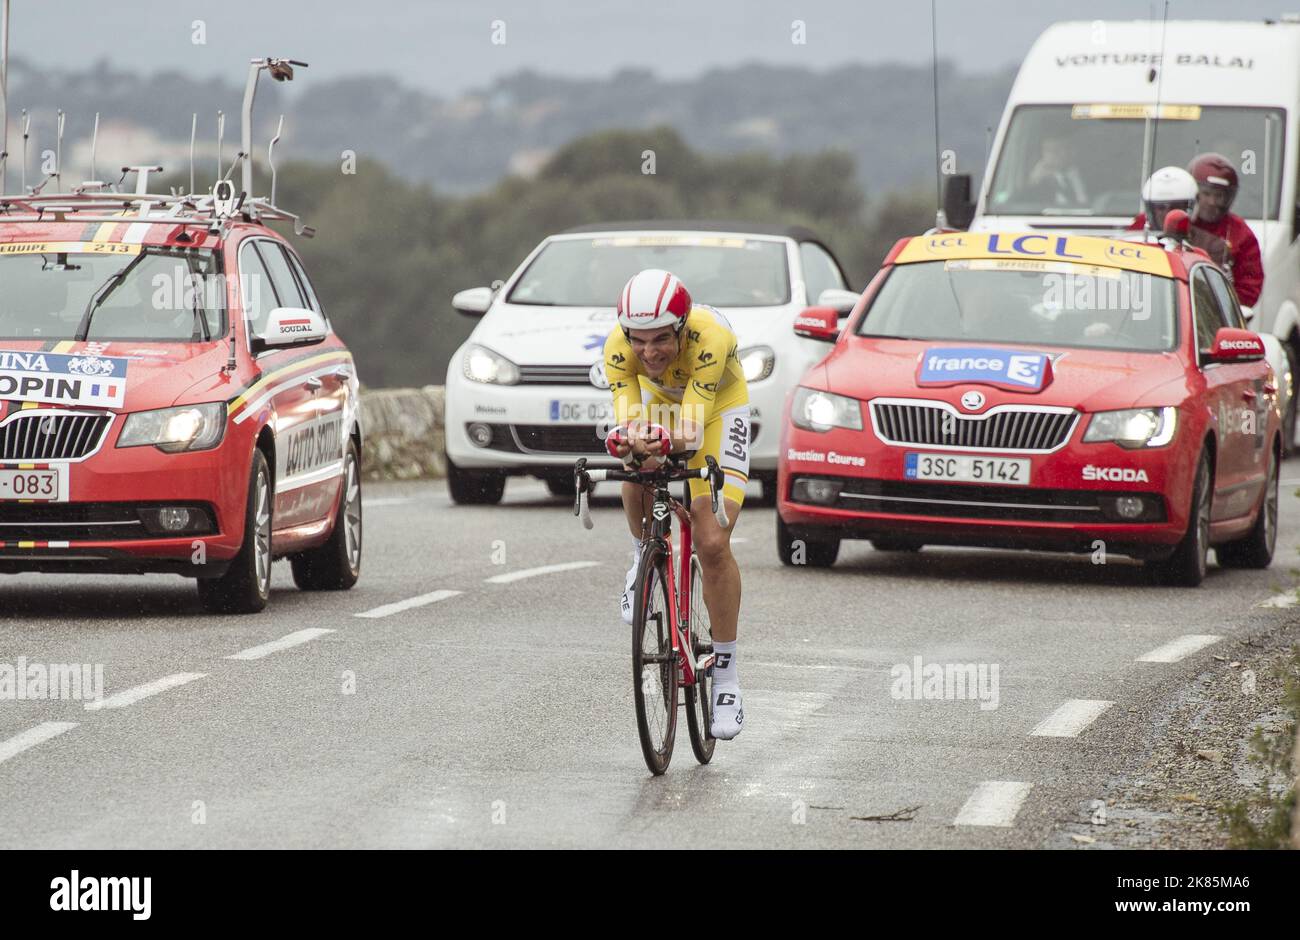 STAGE 7 - 9.5km - Nice - Col D'Eze - Cote D'Azure - Final day's time trial. Tony Gallopin Stock Photo